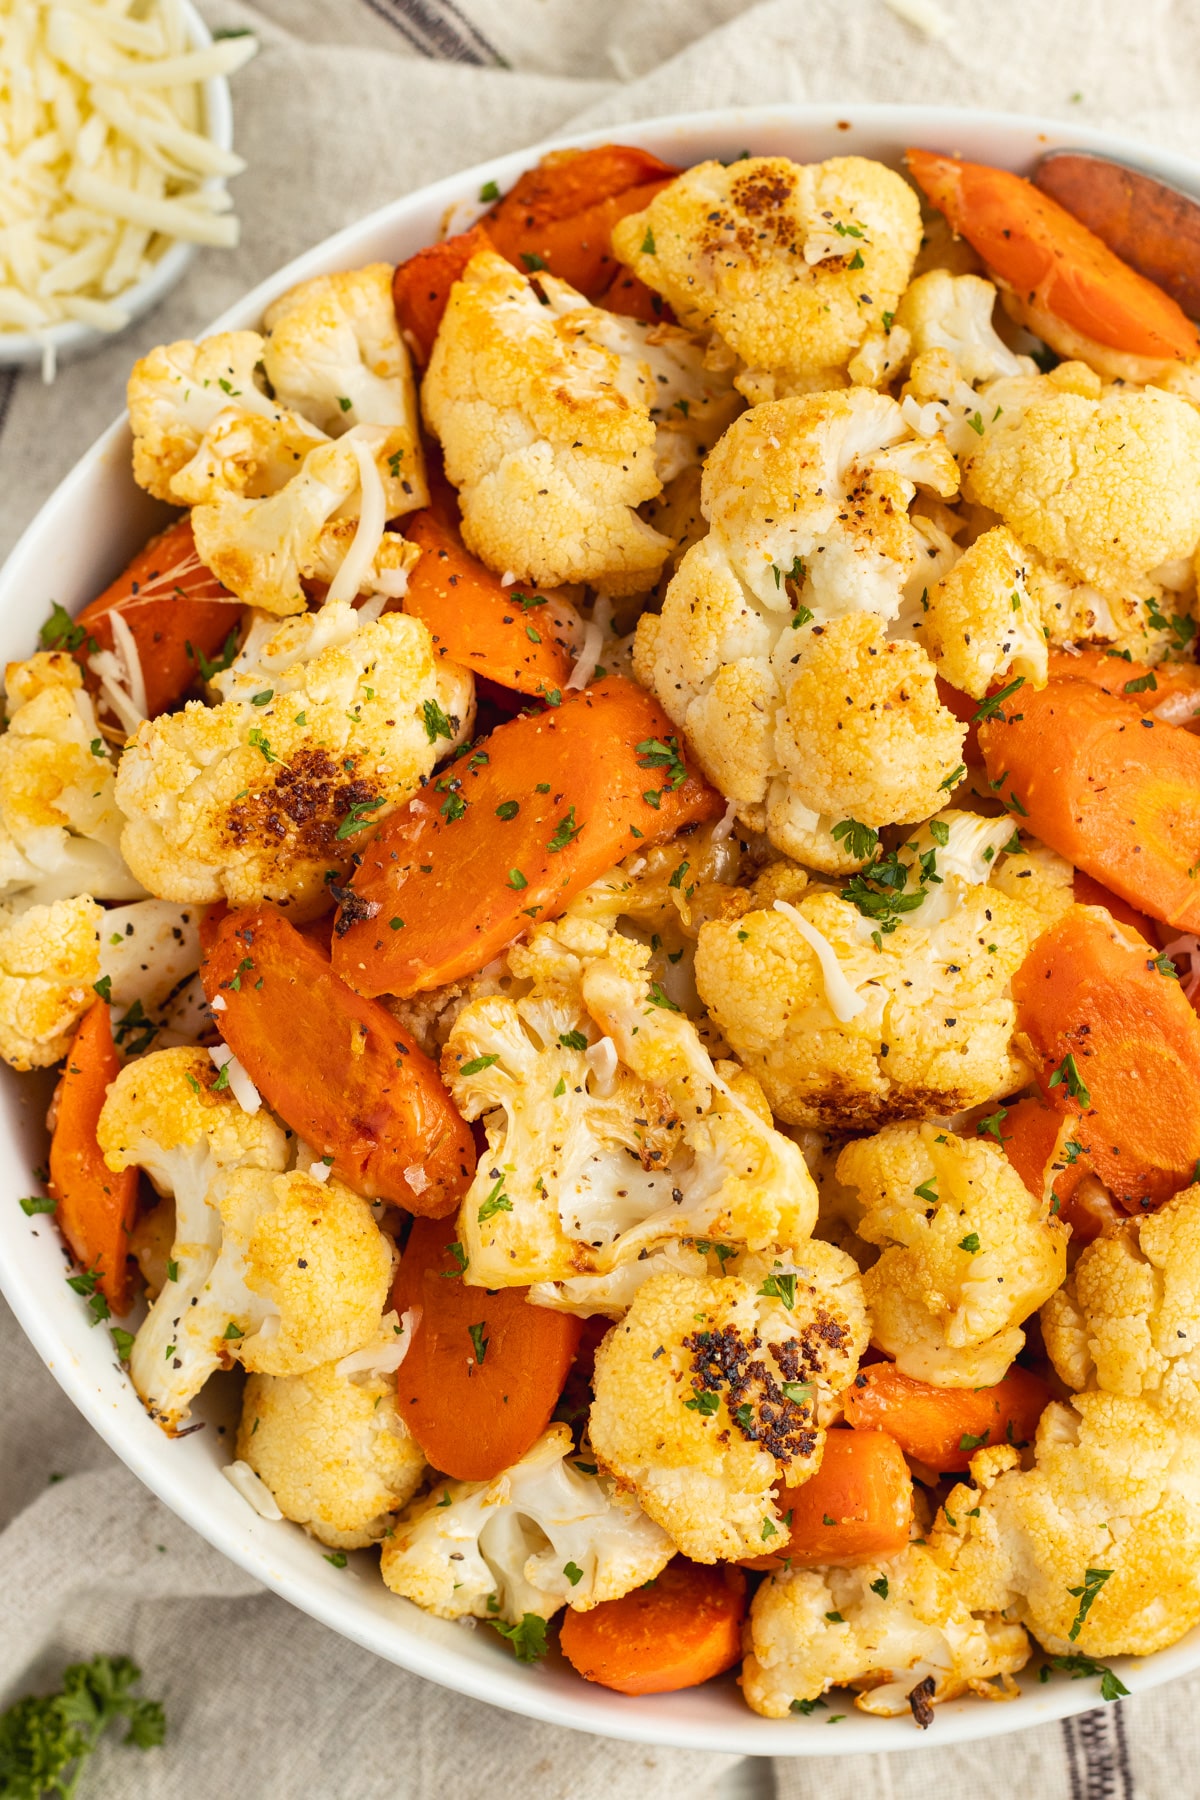 This is a picture of a bowl filled with cheesy roasted carrots and cauliflower.